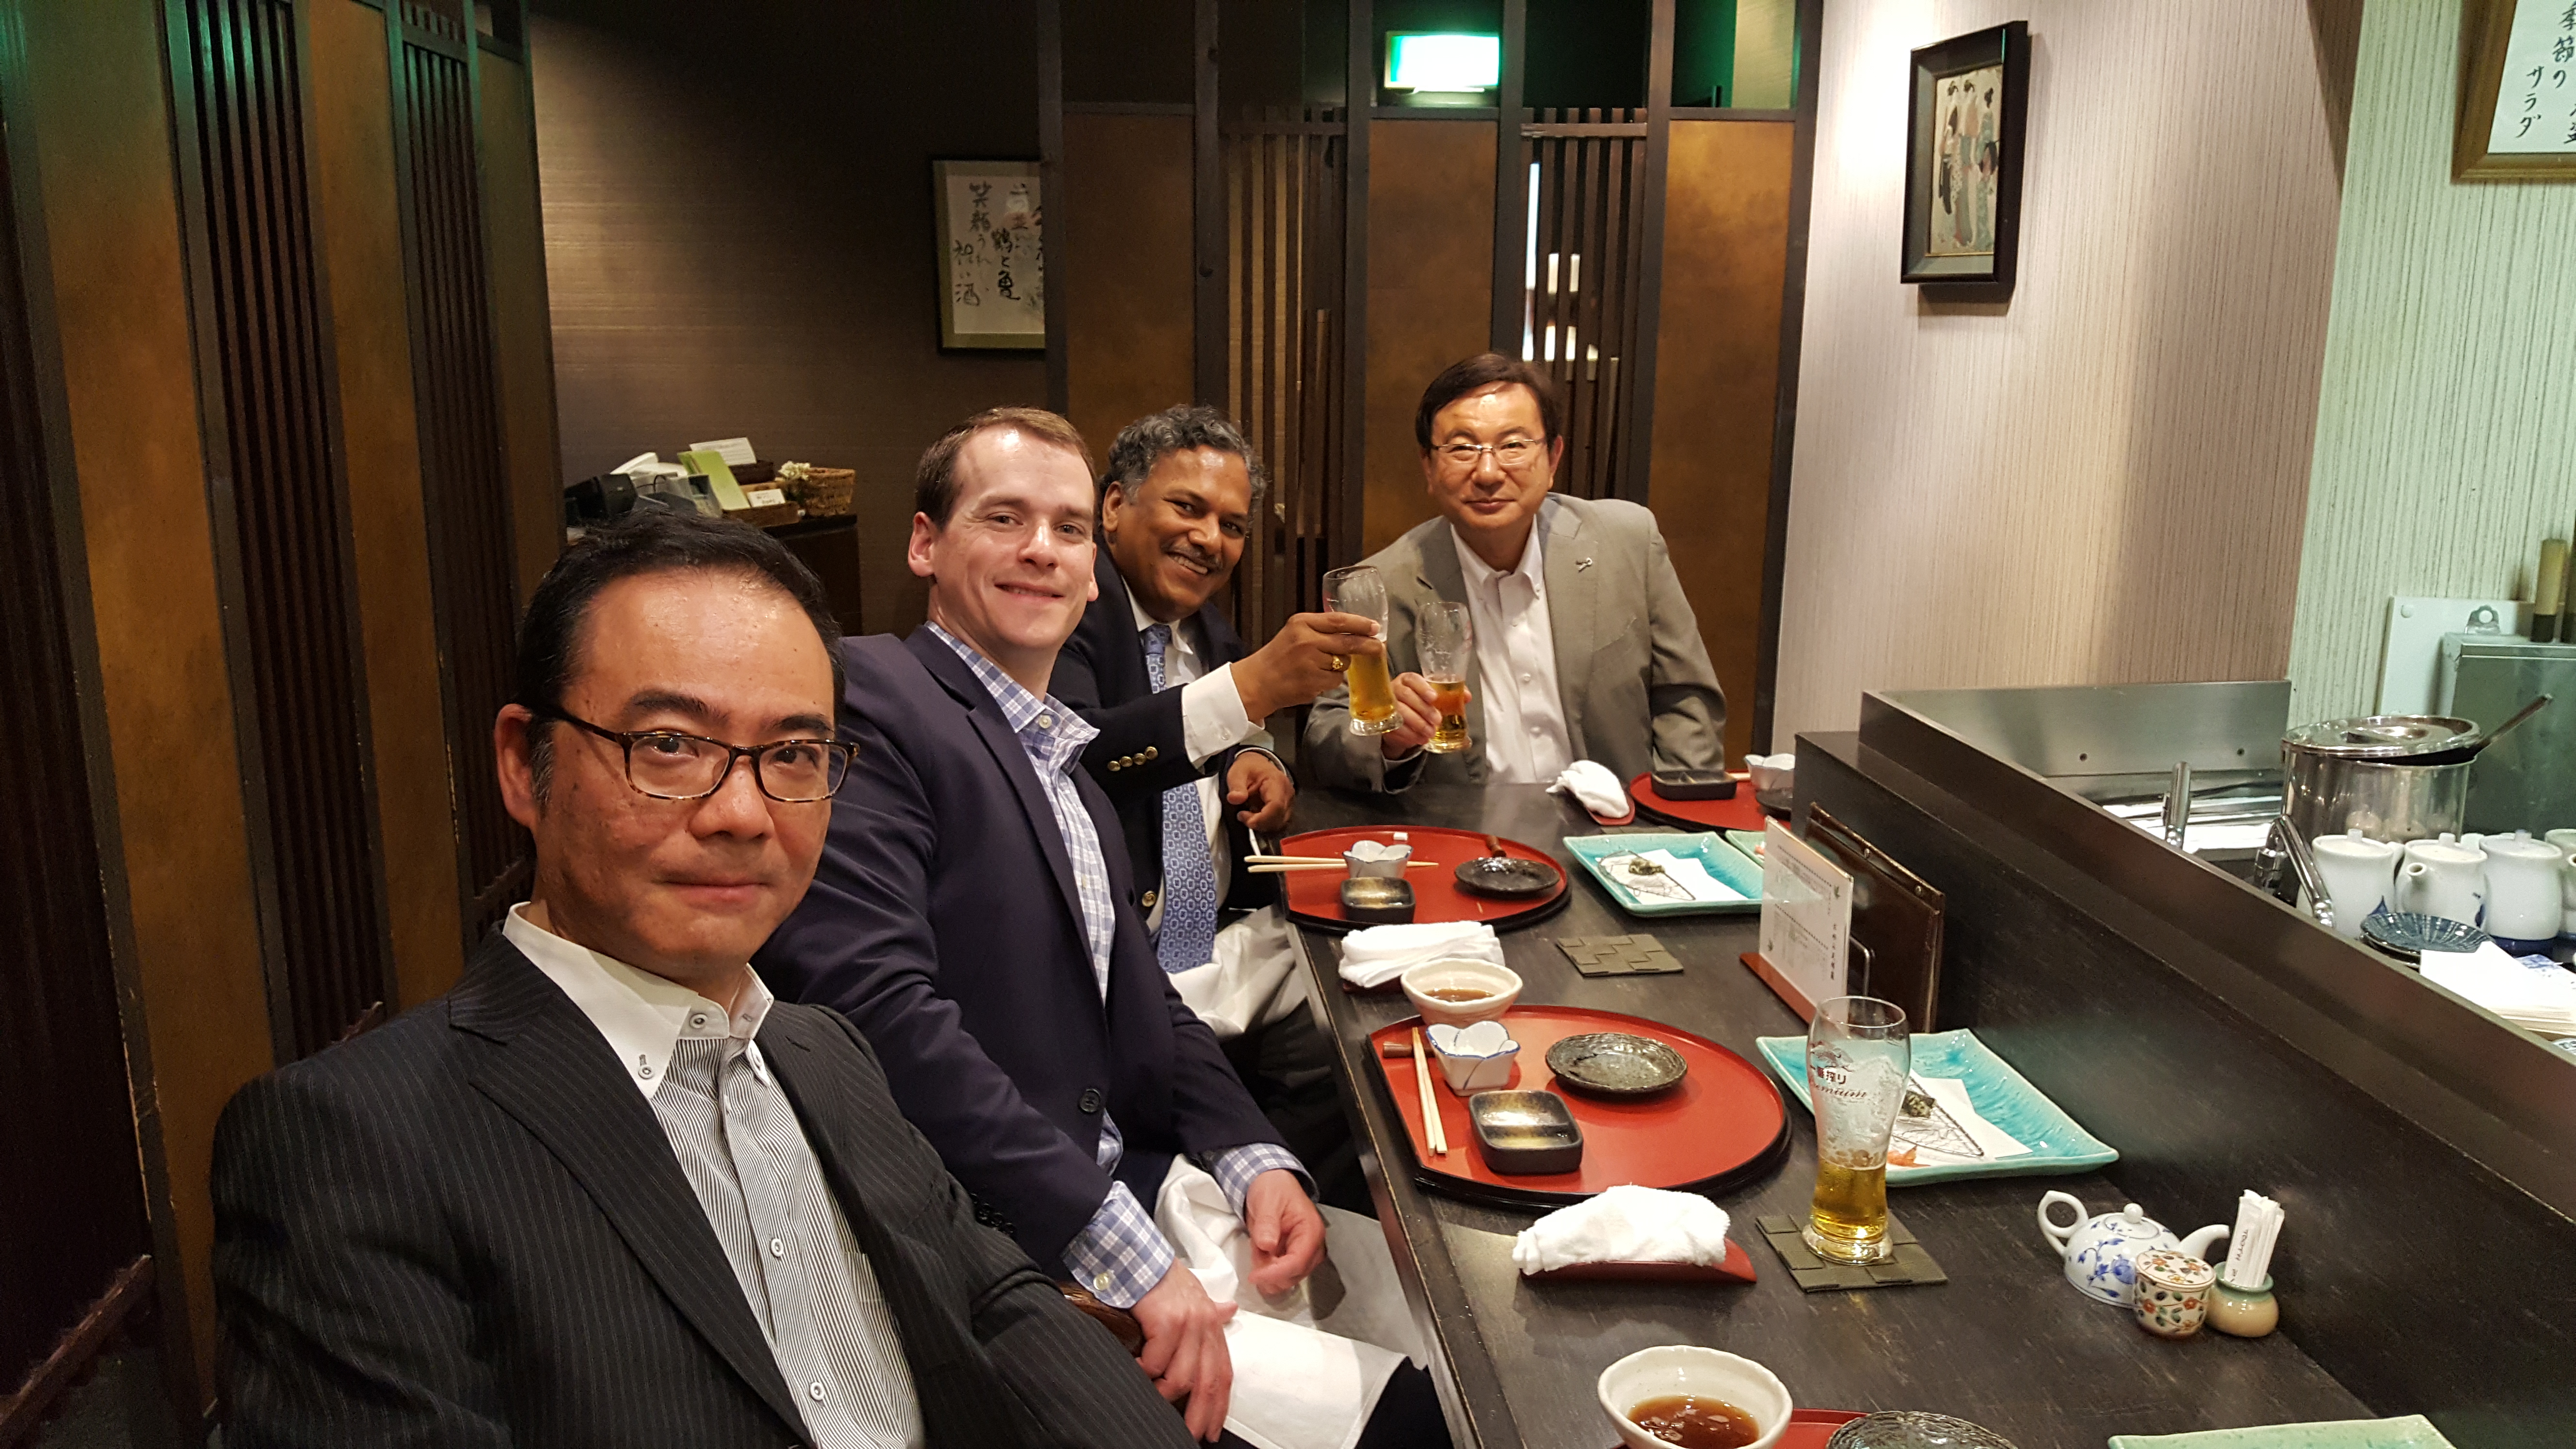 Professor Dravid, JEOL USA's Patrick Phillips and two Japanese JEOL executives enjoy beers and a casual dinner